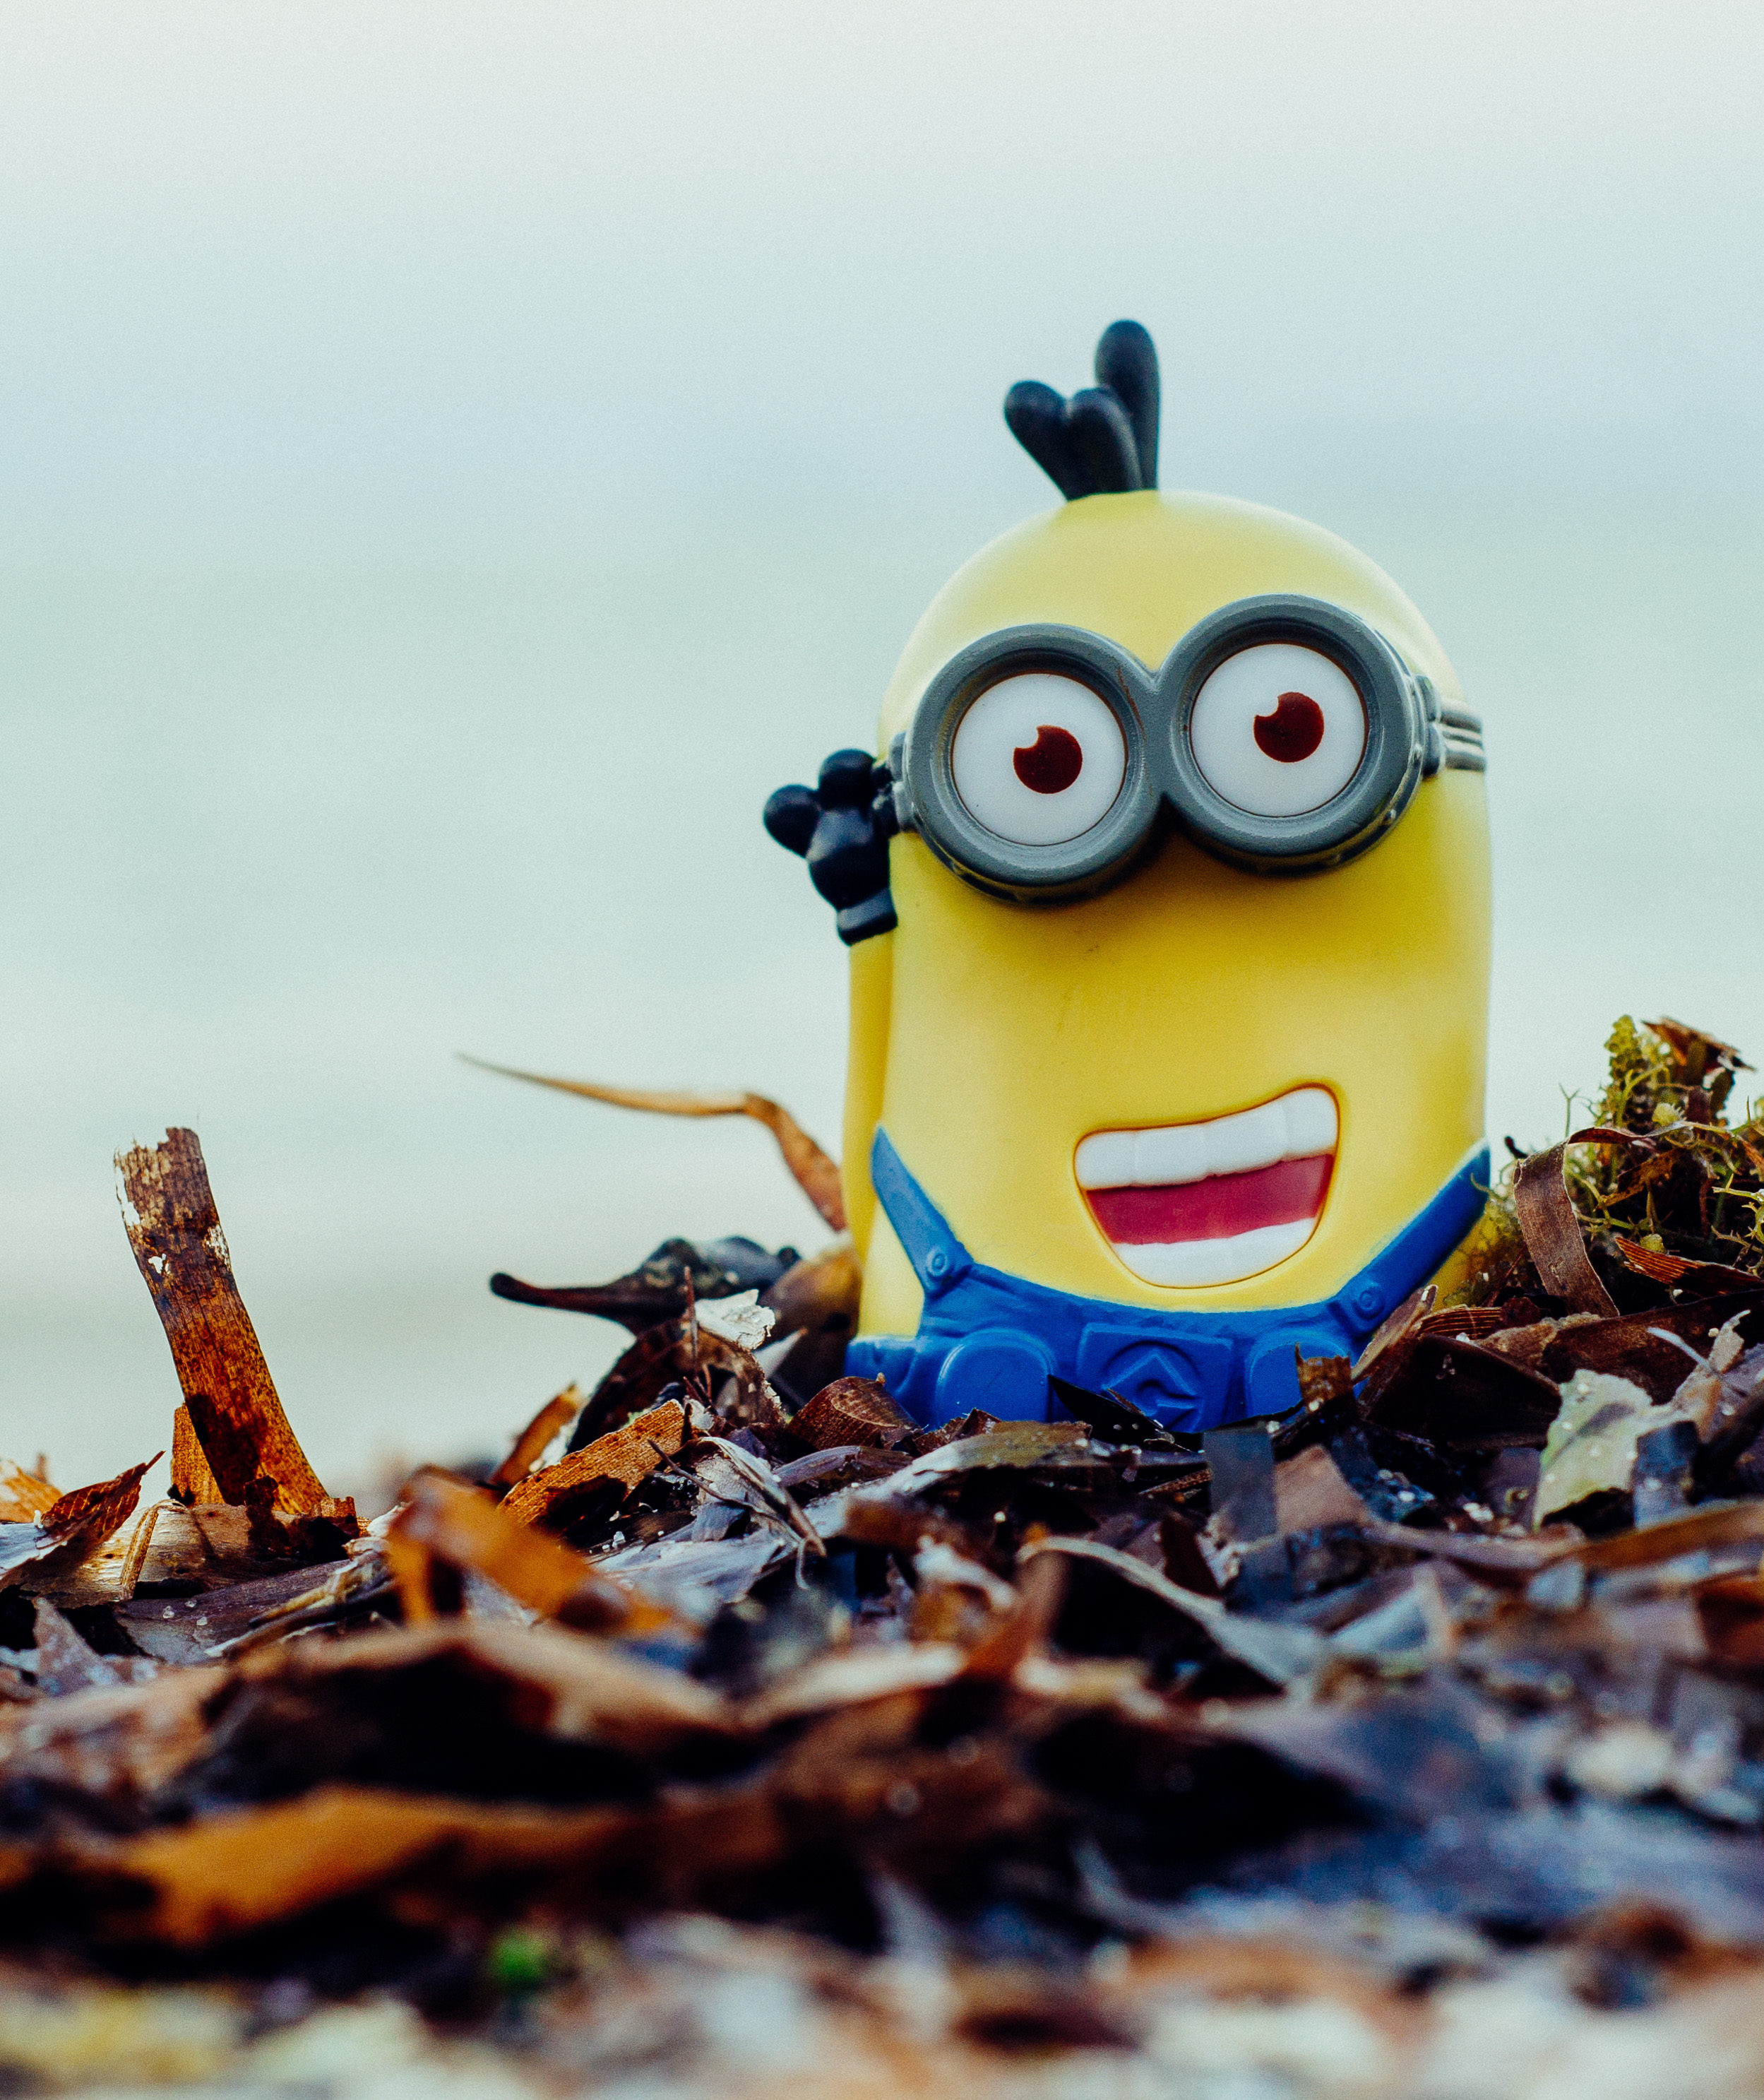 For Android - Minion Weed Hd Wallpaper For Iphone - HD Wallpaper 